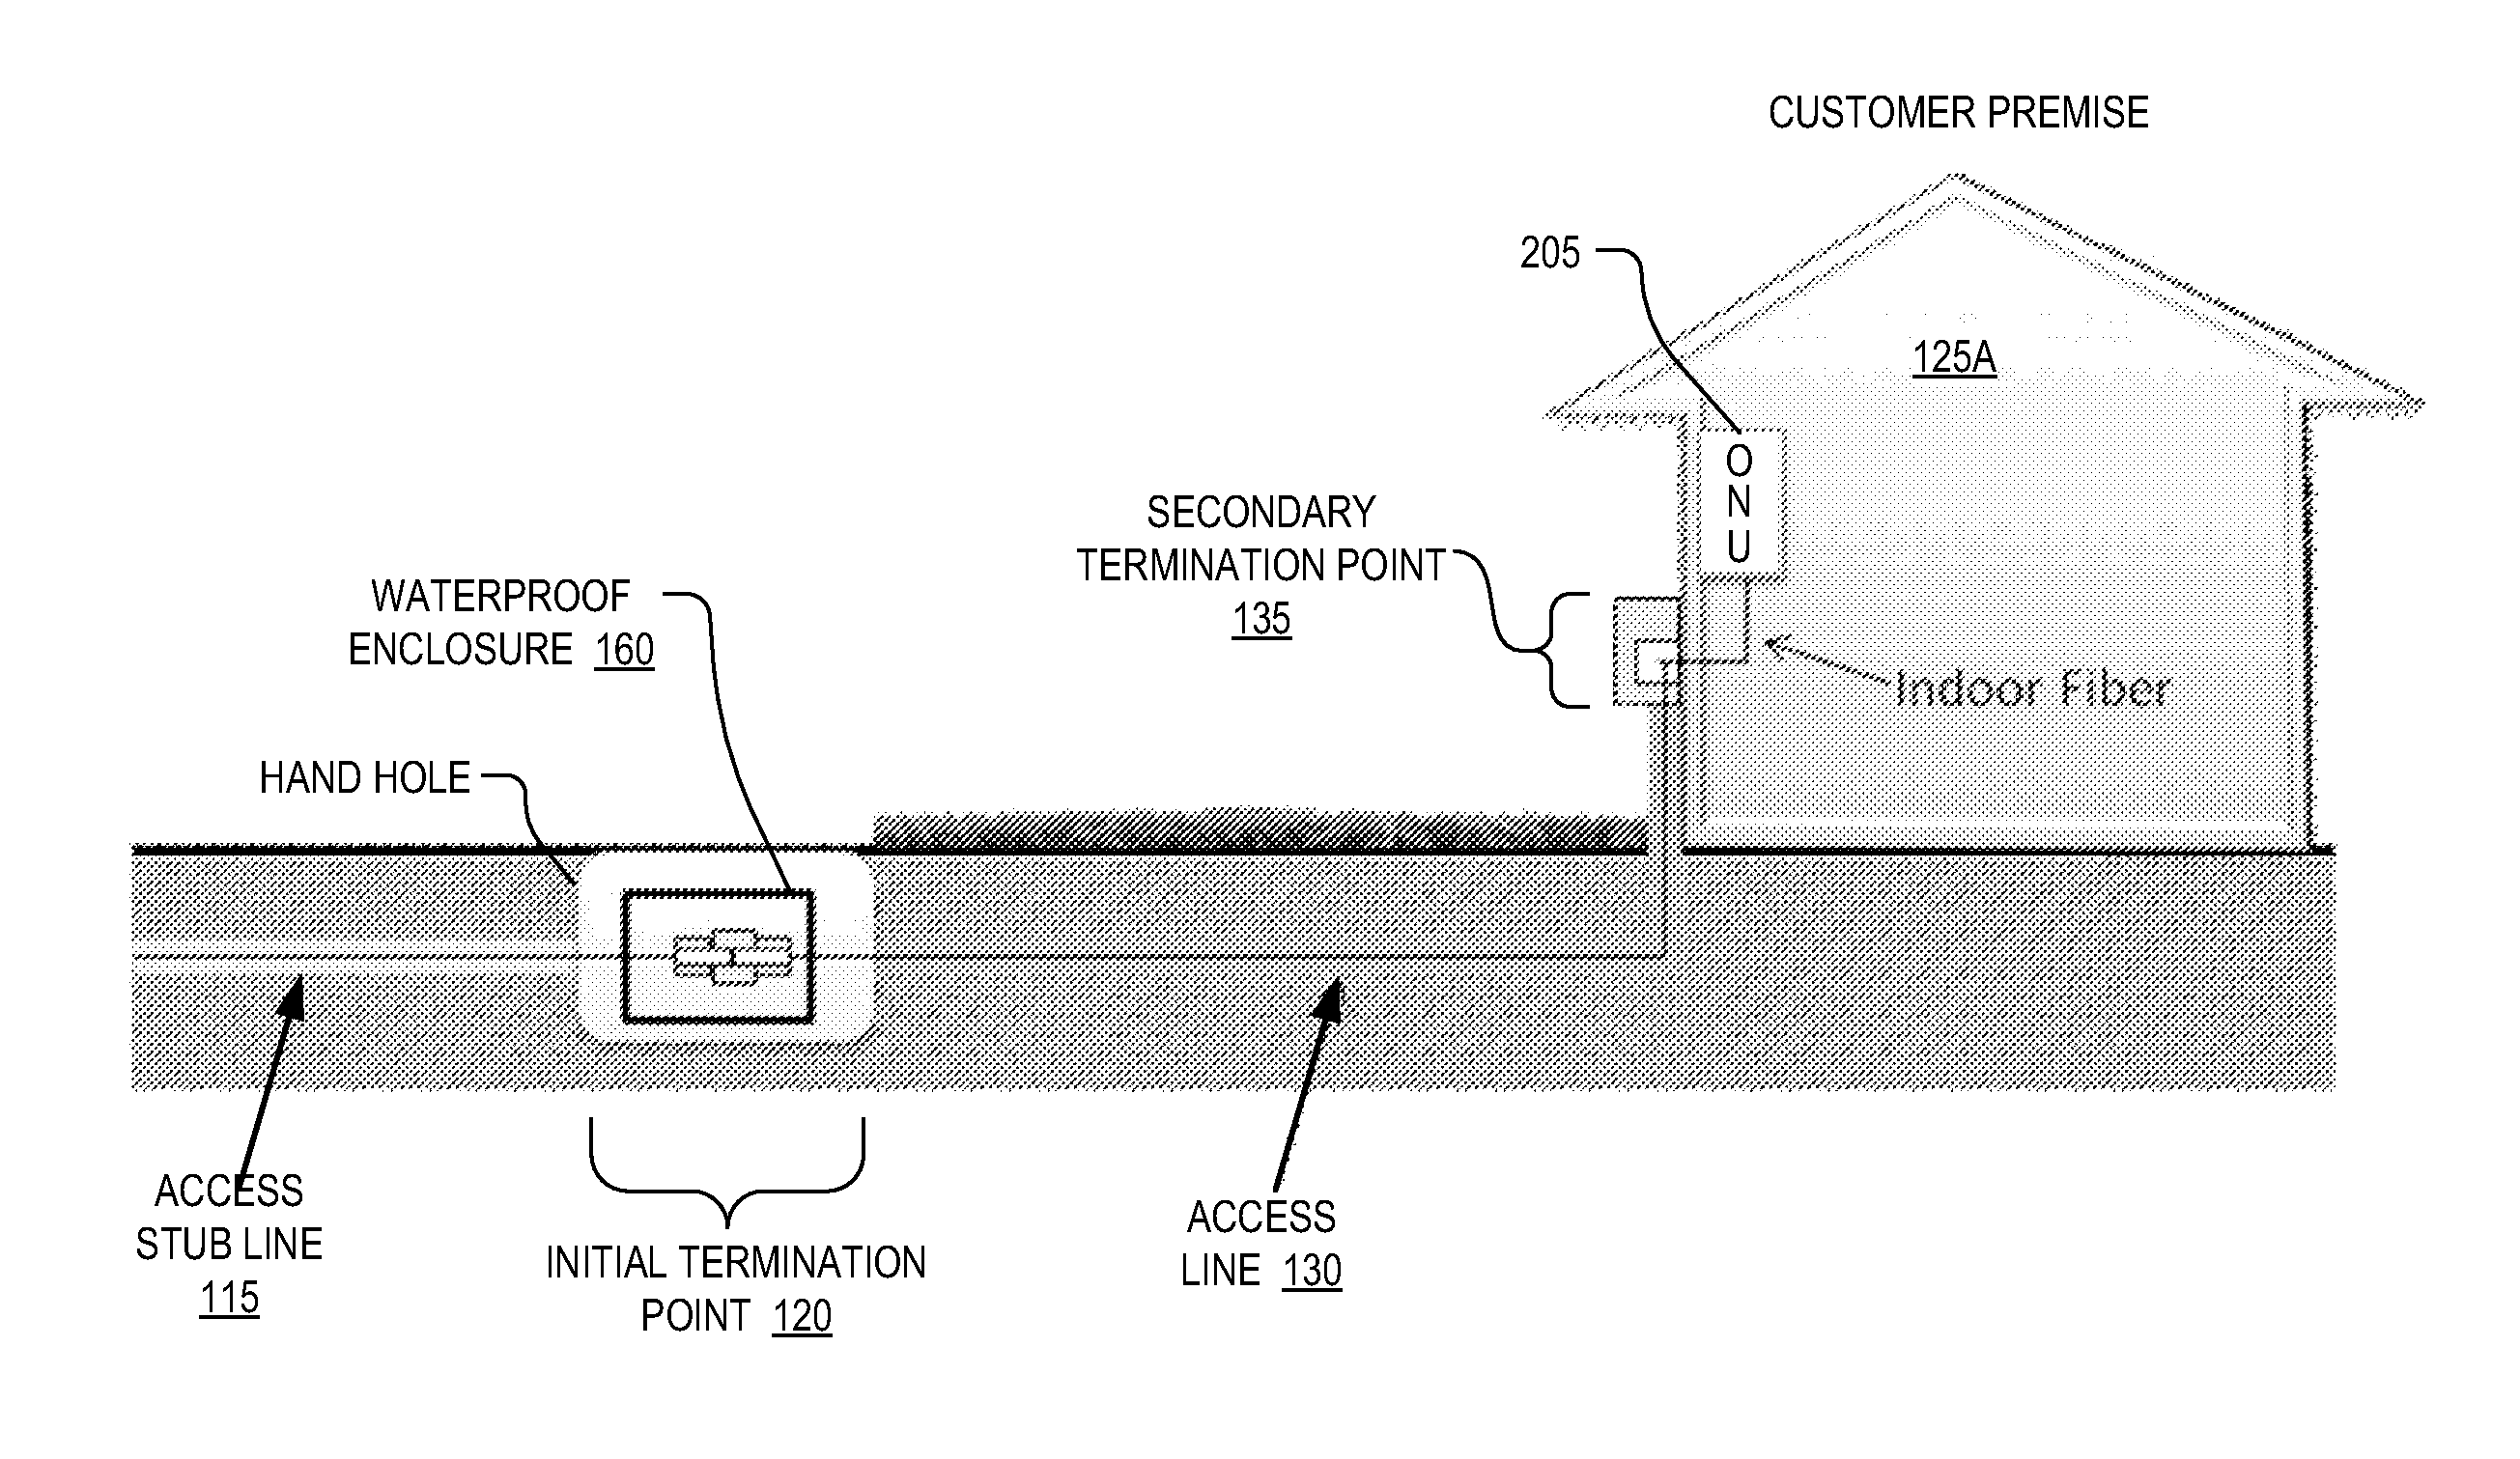 Installation of fiber-to-the-premise using optical demarcation devices